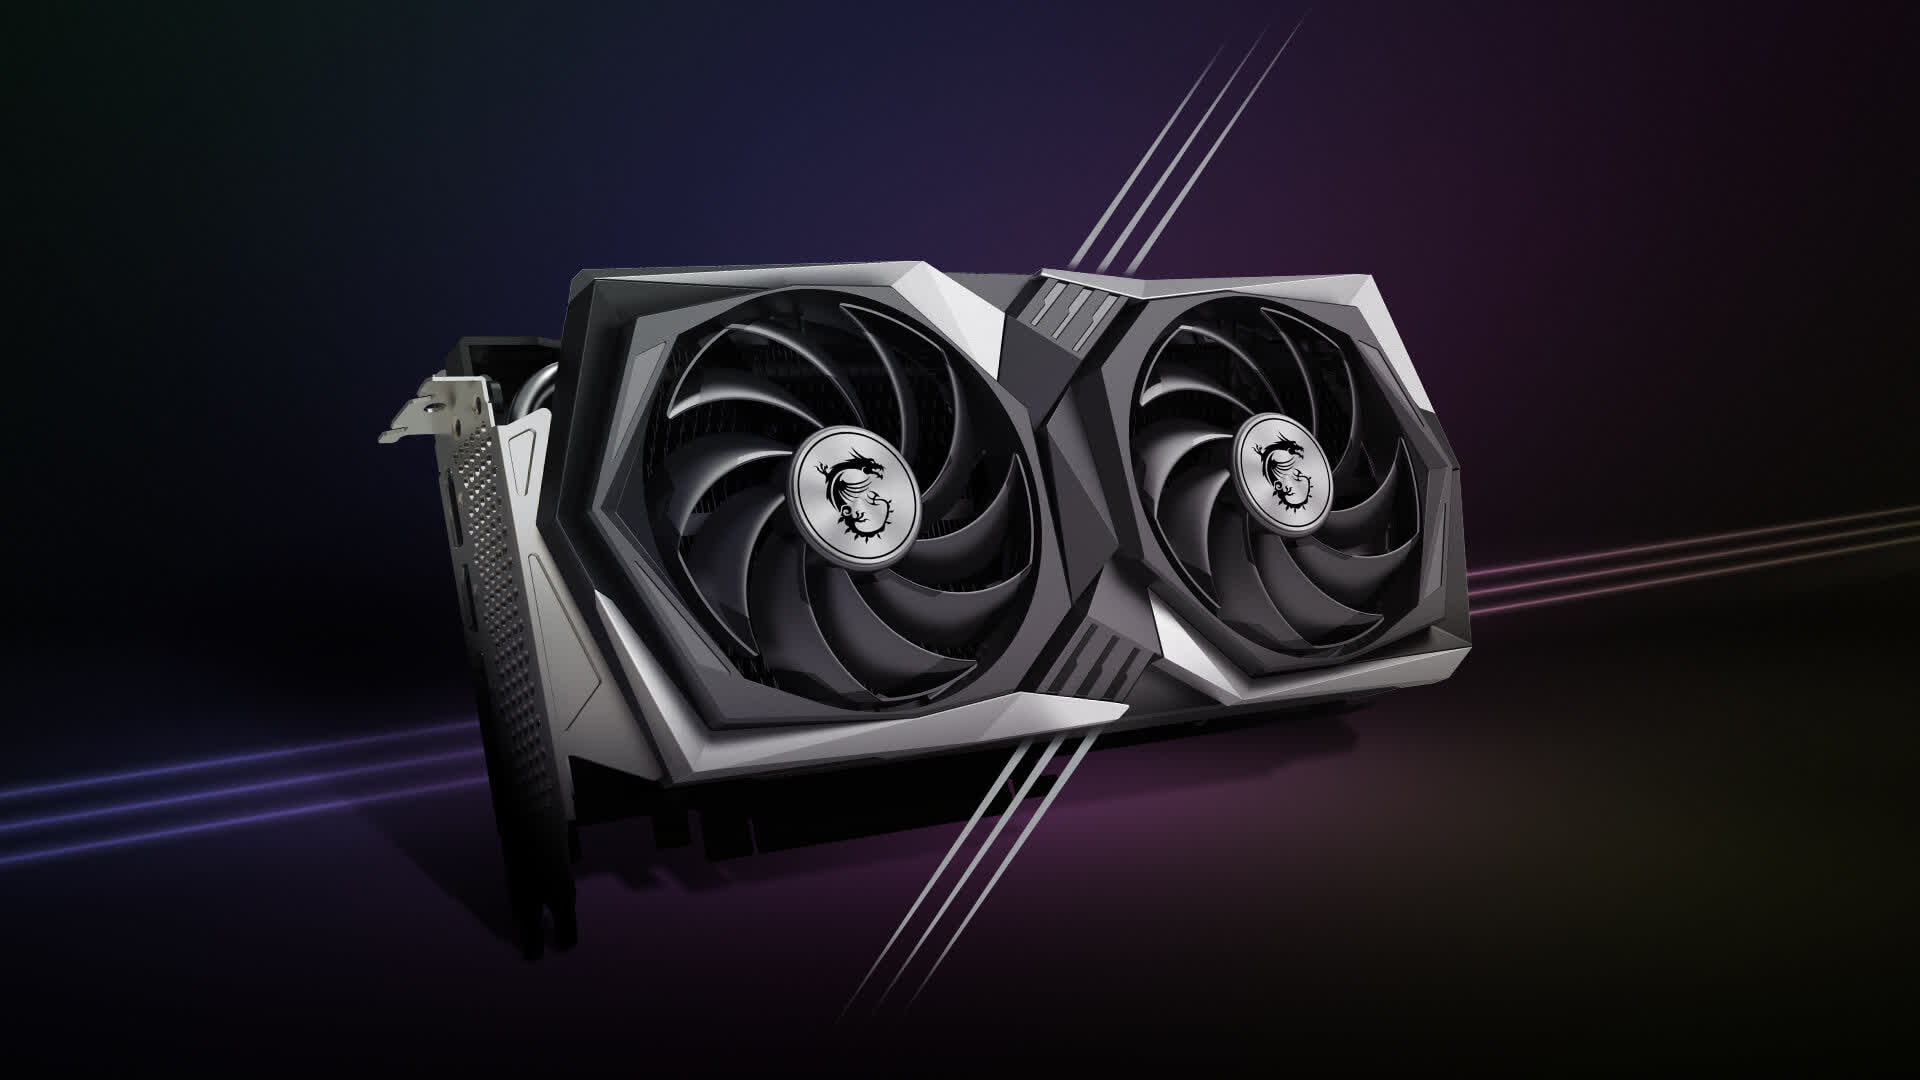 Newegg briefly listed the Radeon RX 6600 XT for $1,100 a few days early